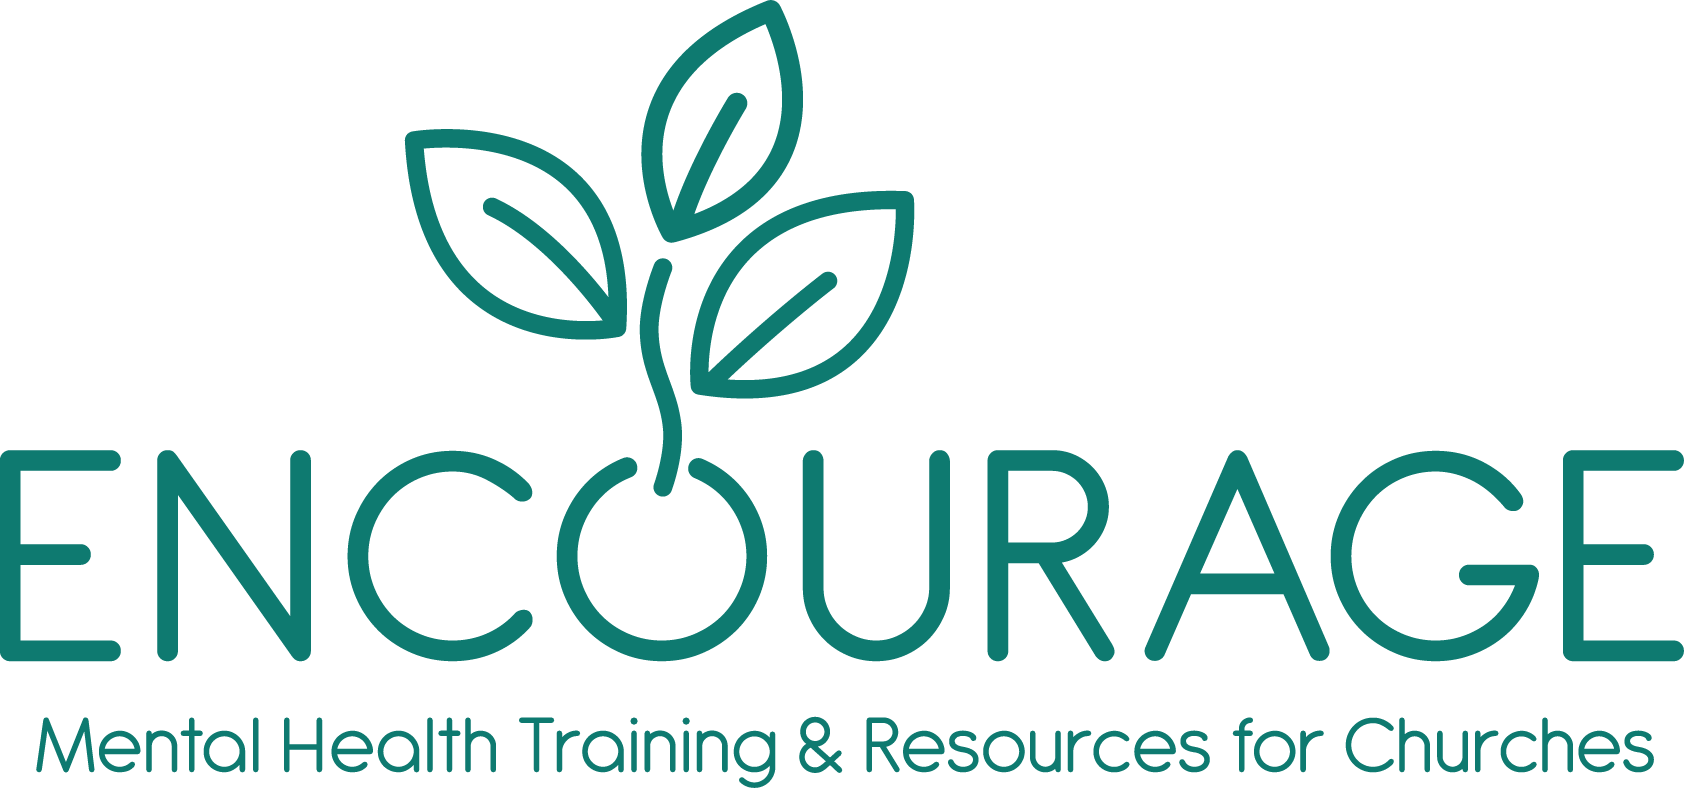 Logo for encourage mental health training and resources for churches. it has the word encourage with the O made to look like a seed that is growing with three leaves